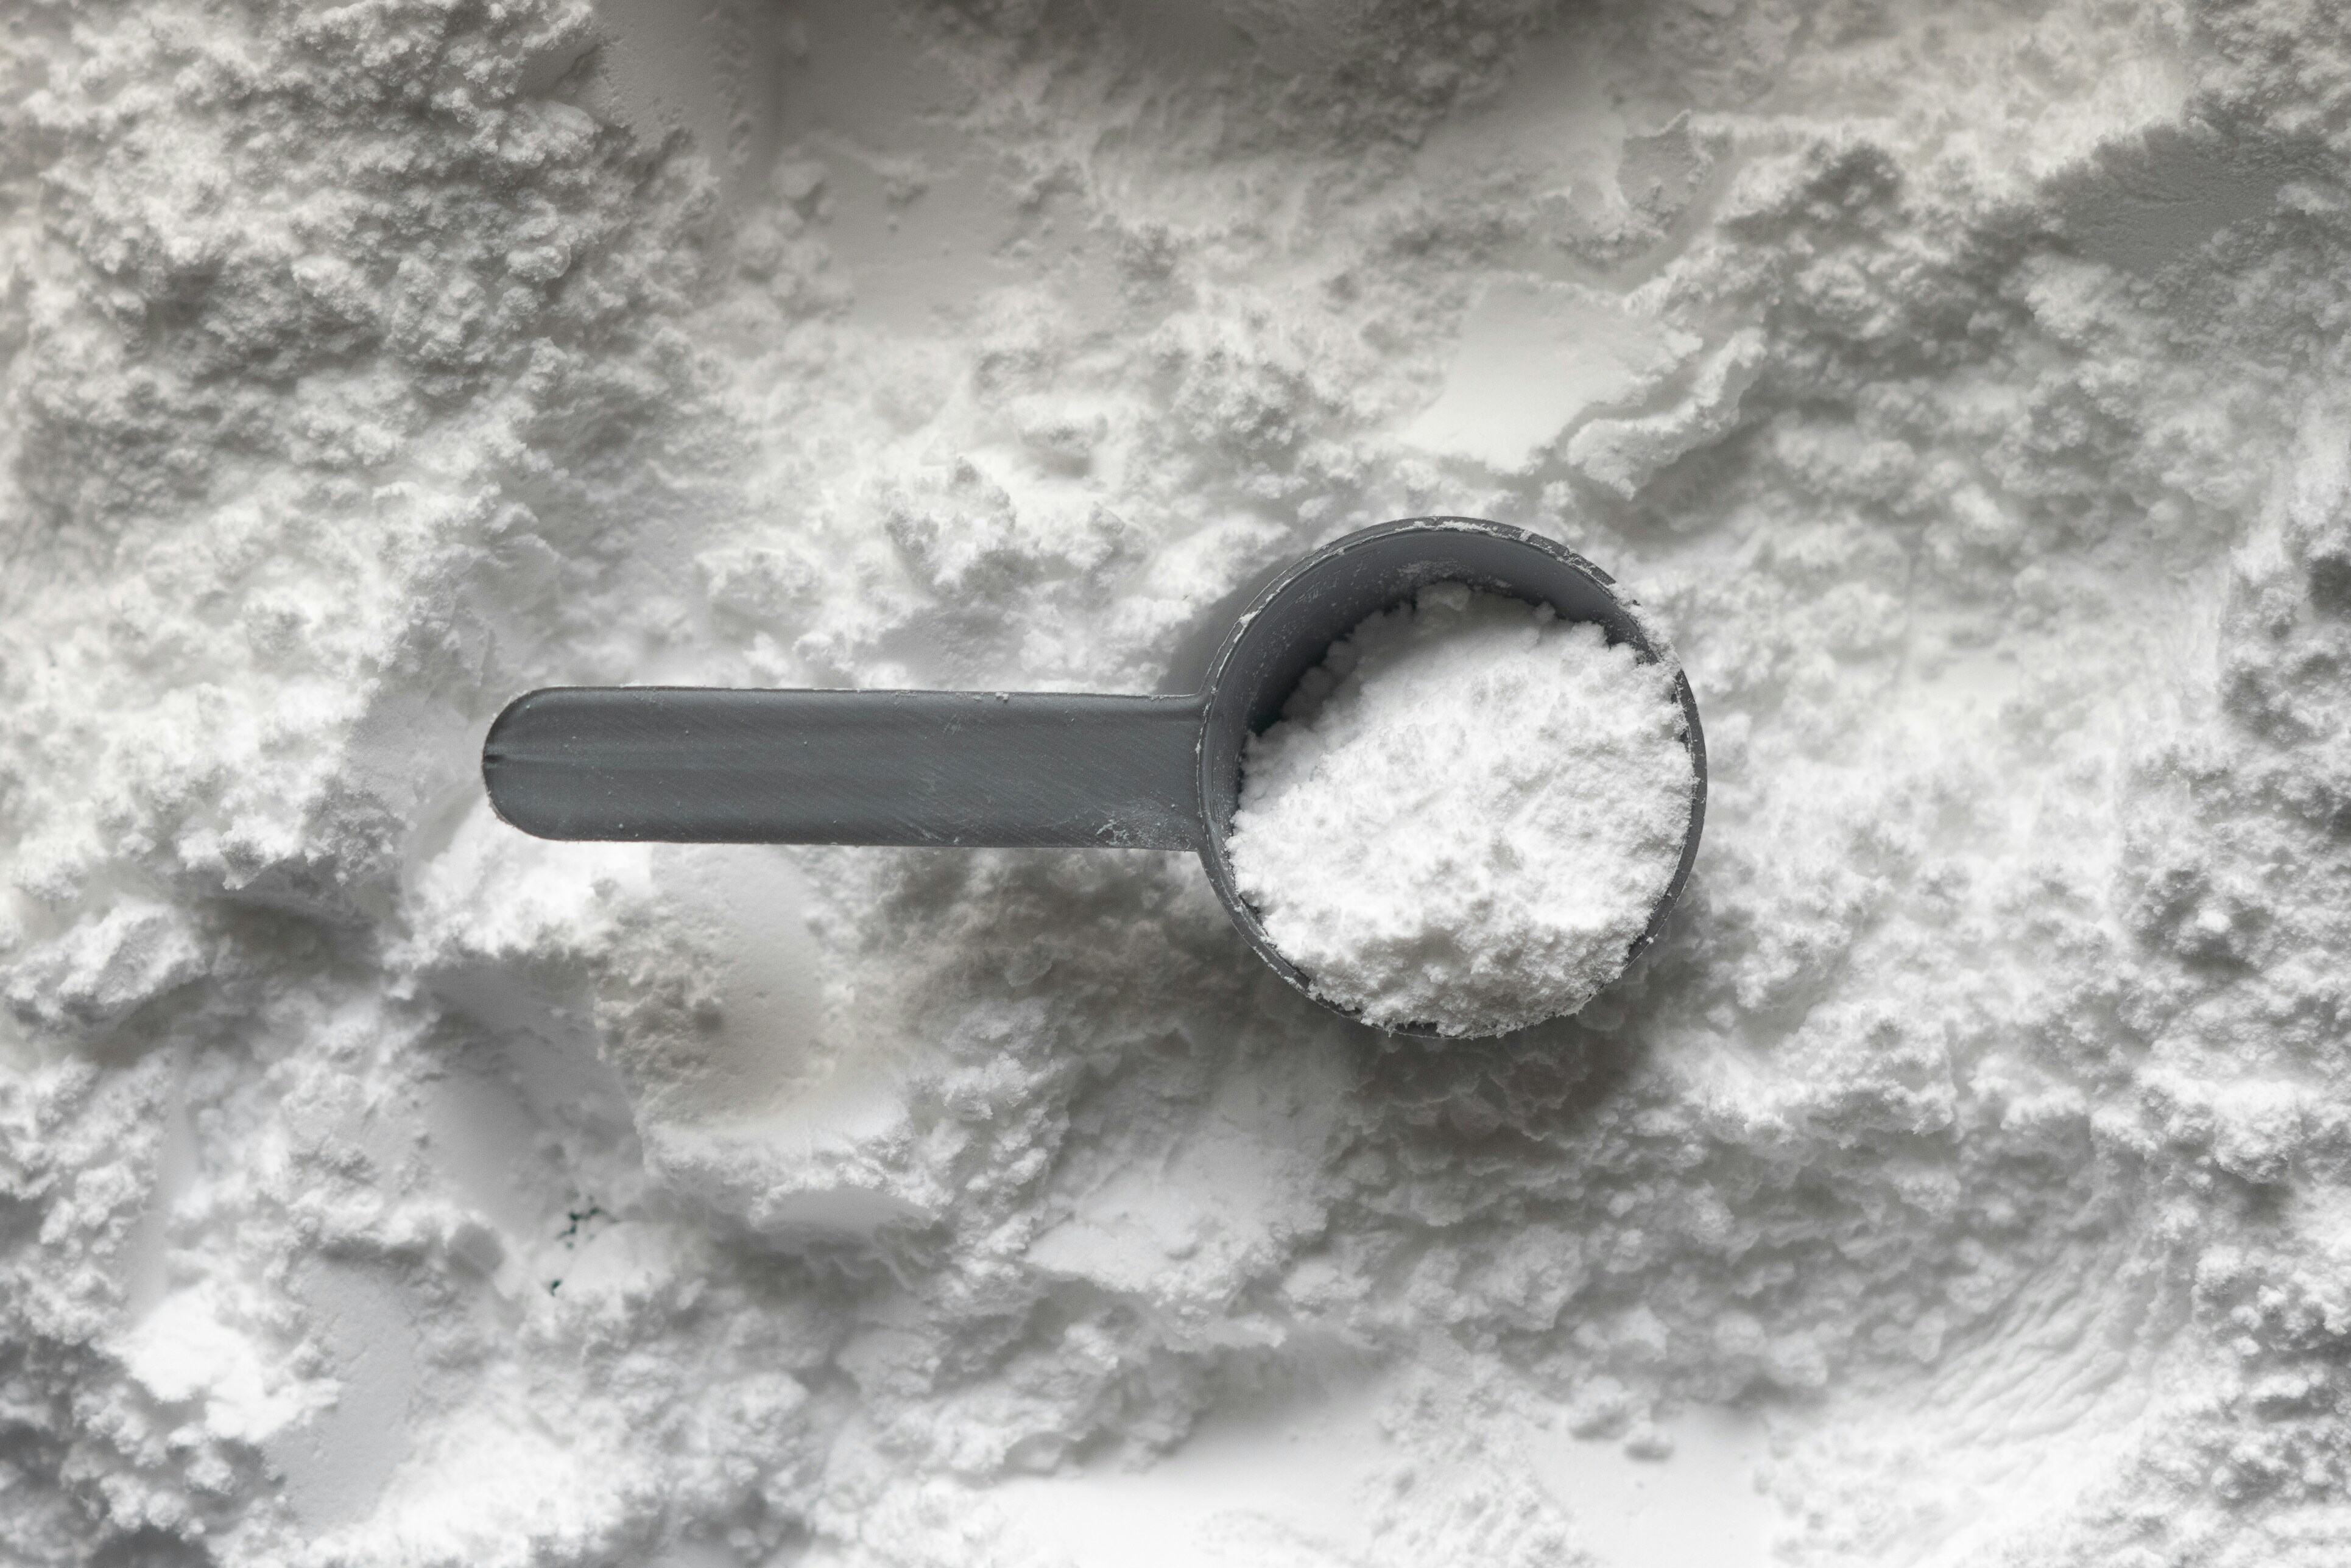 Maltodextrin, a white powder used as a filler in foods